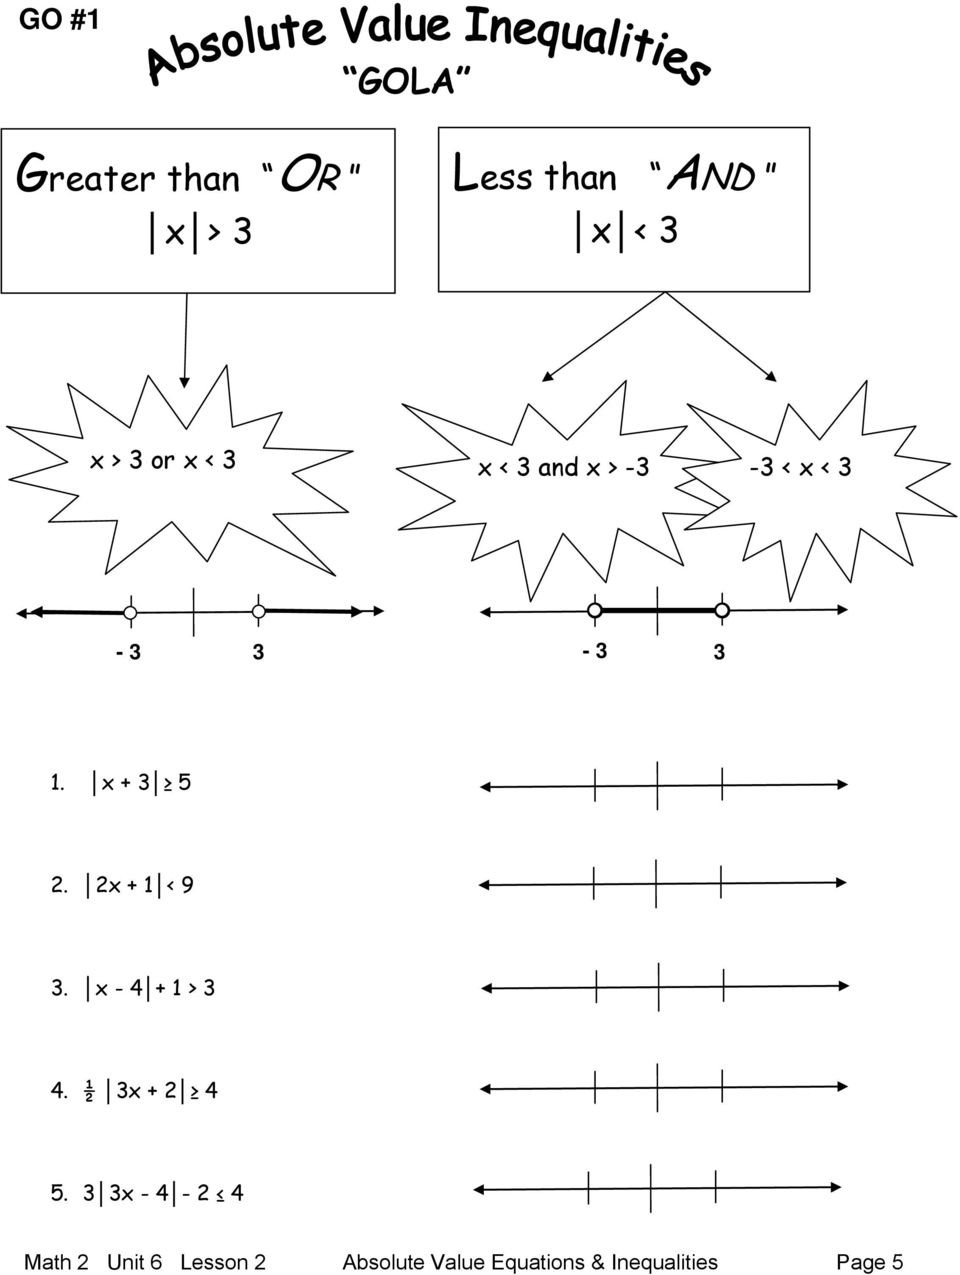 Graphing Absolute Value Equations Worksheet Acquisition Lesson Planning form Key Standards Addressed In